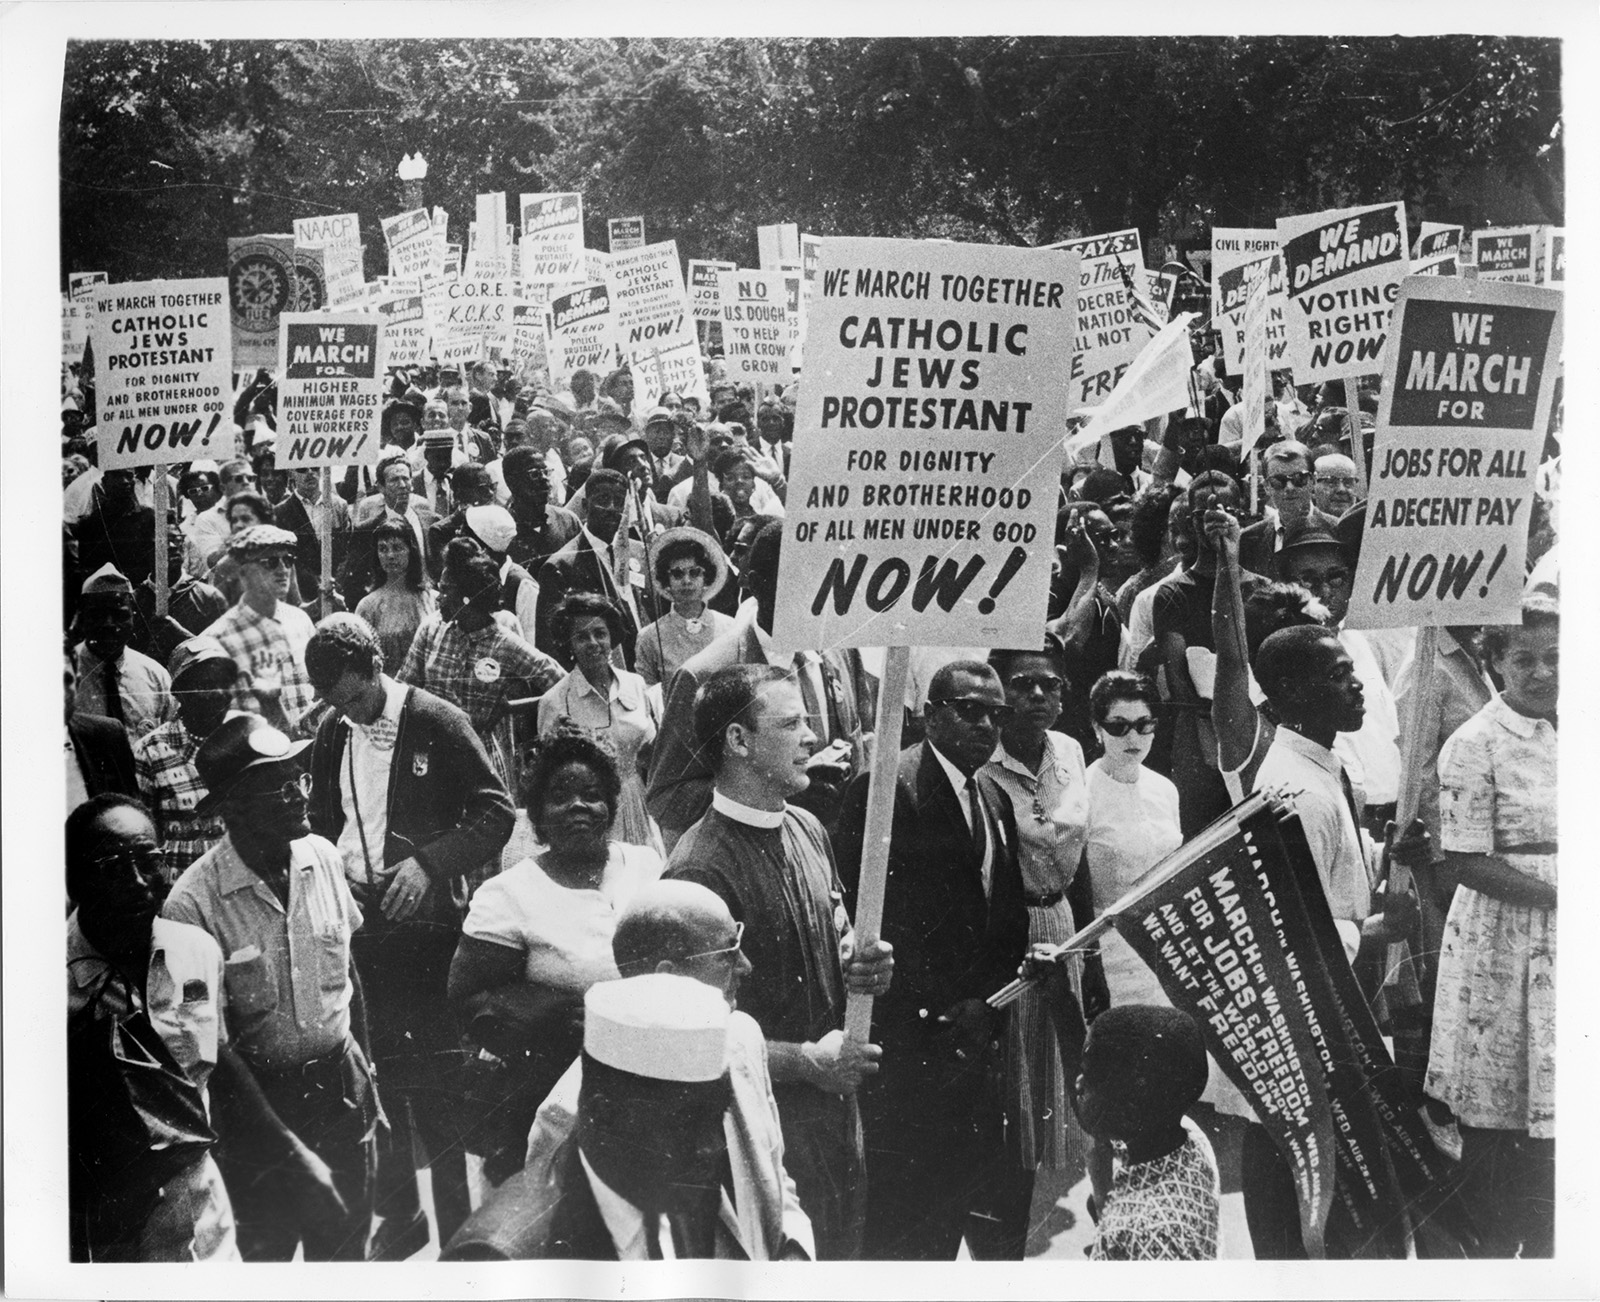 Religious participation in the March on Washington for Jobs and Freedom exceeded all expectations in 1963. In addition to many banners and signs designating specific religious groups, many churchmen and women marched as Protestants, Catholics and Jews, united in their support of full equality for all American citizens. More than half the signs in the March were those of churches, synagogues and related agencies. RNS archive photo by Seth Muse